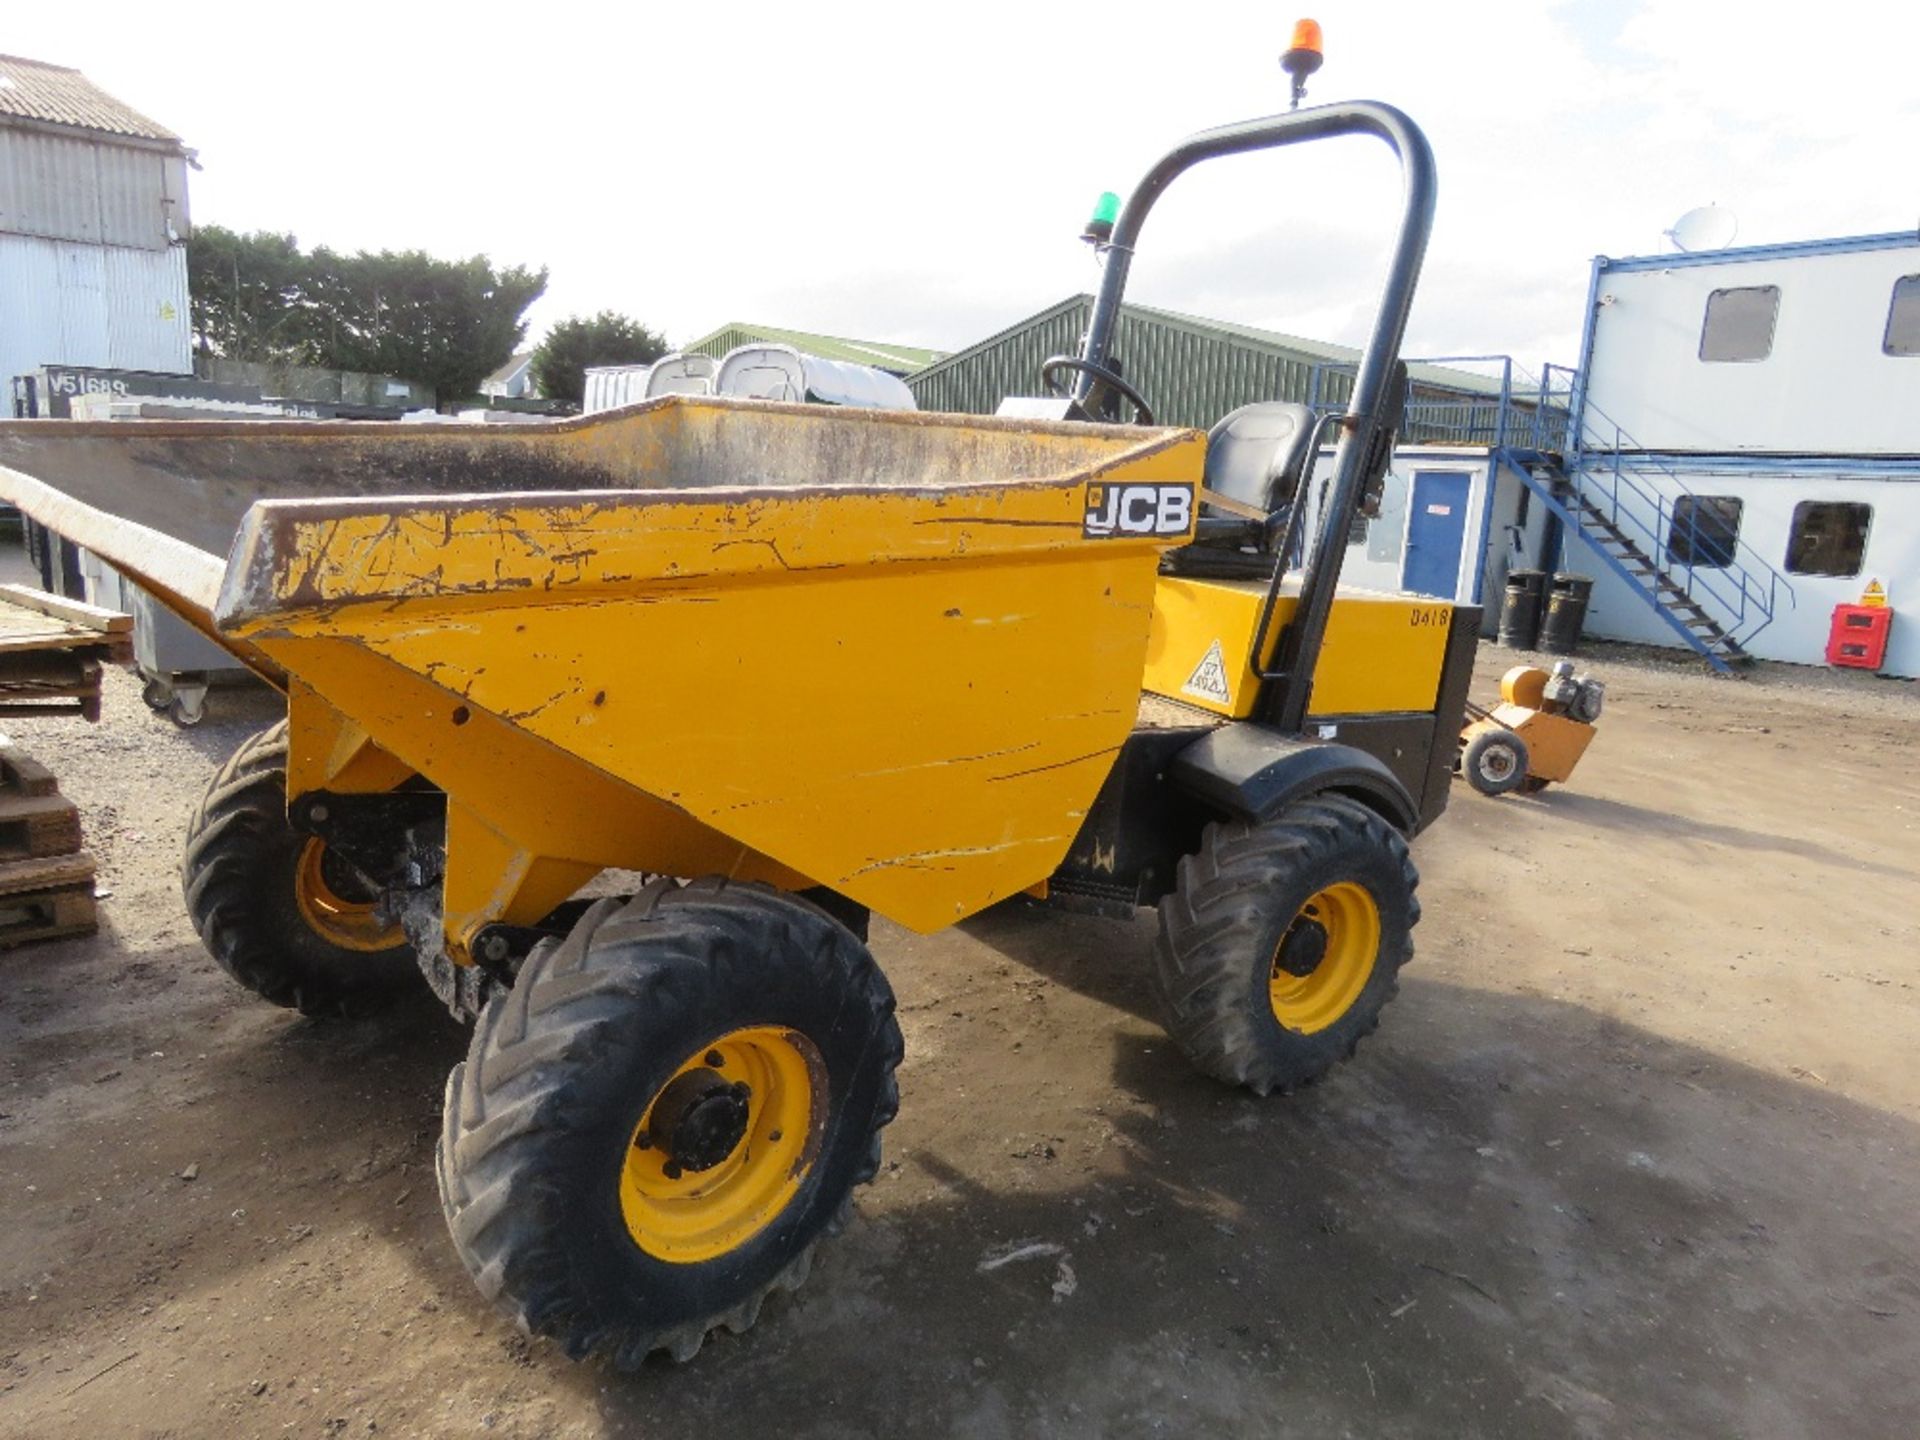 JCB 3 TONNE STRAIGHT TIP DUMPER YEAR 2017. 1321 REC HRS REG:RE17 LXK. WITH V5 AVAILABLE. PN:418. DI